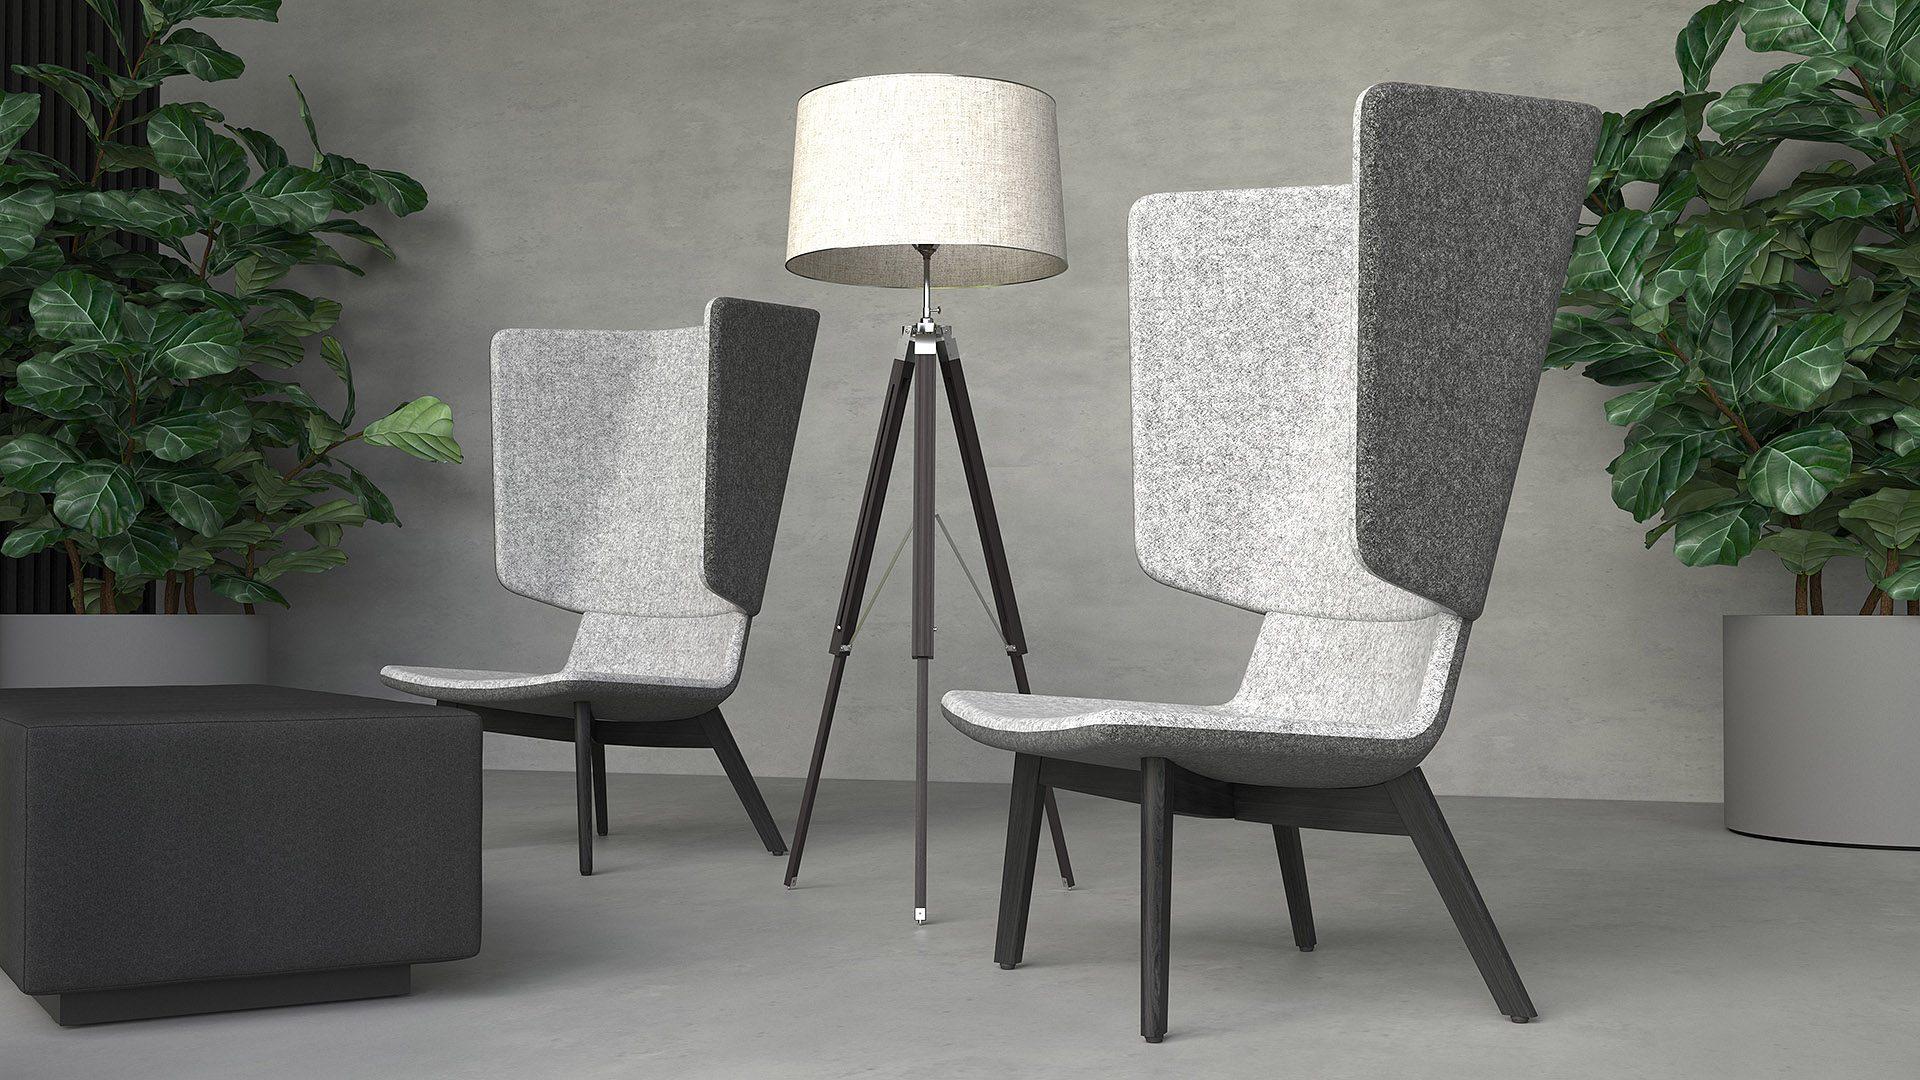 With its visually striking Scandinavian design, this soft seating family is perfect for modern offices that exude a chic vibe and looks just as nicely in traditional office spaces. 